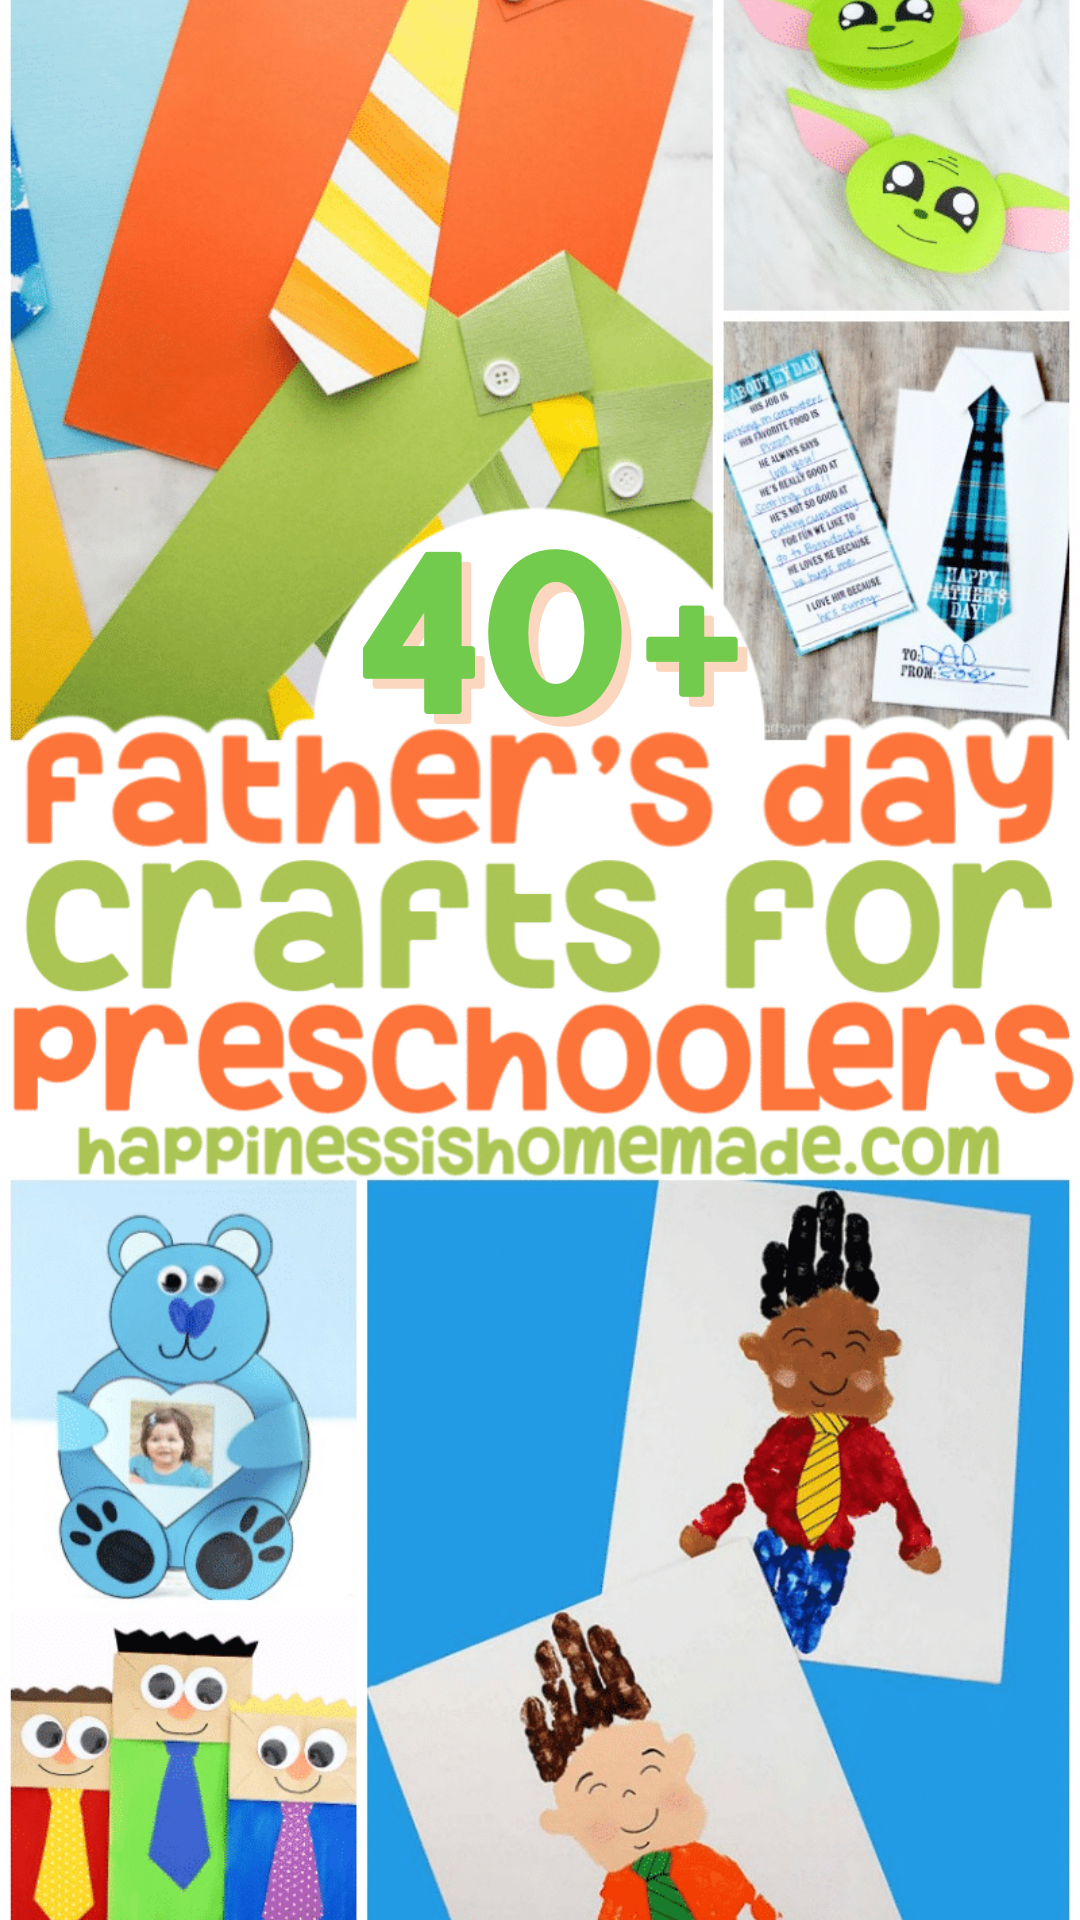 40+ Father's Day Crafts for Preschoolers